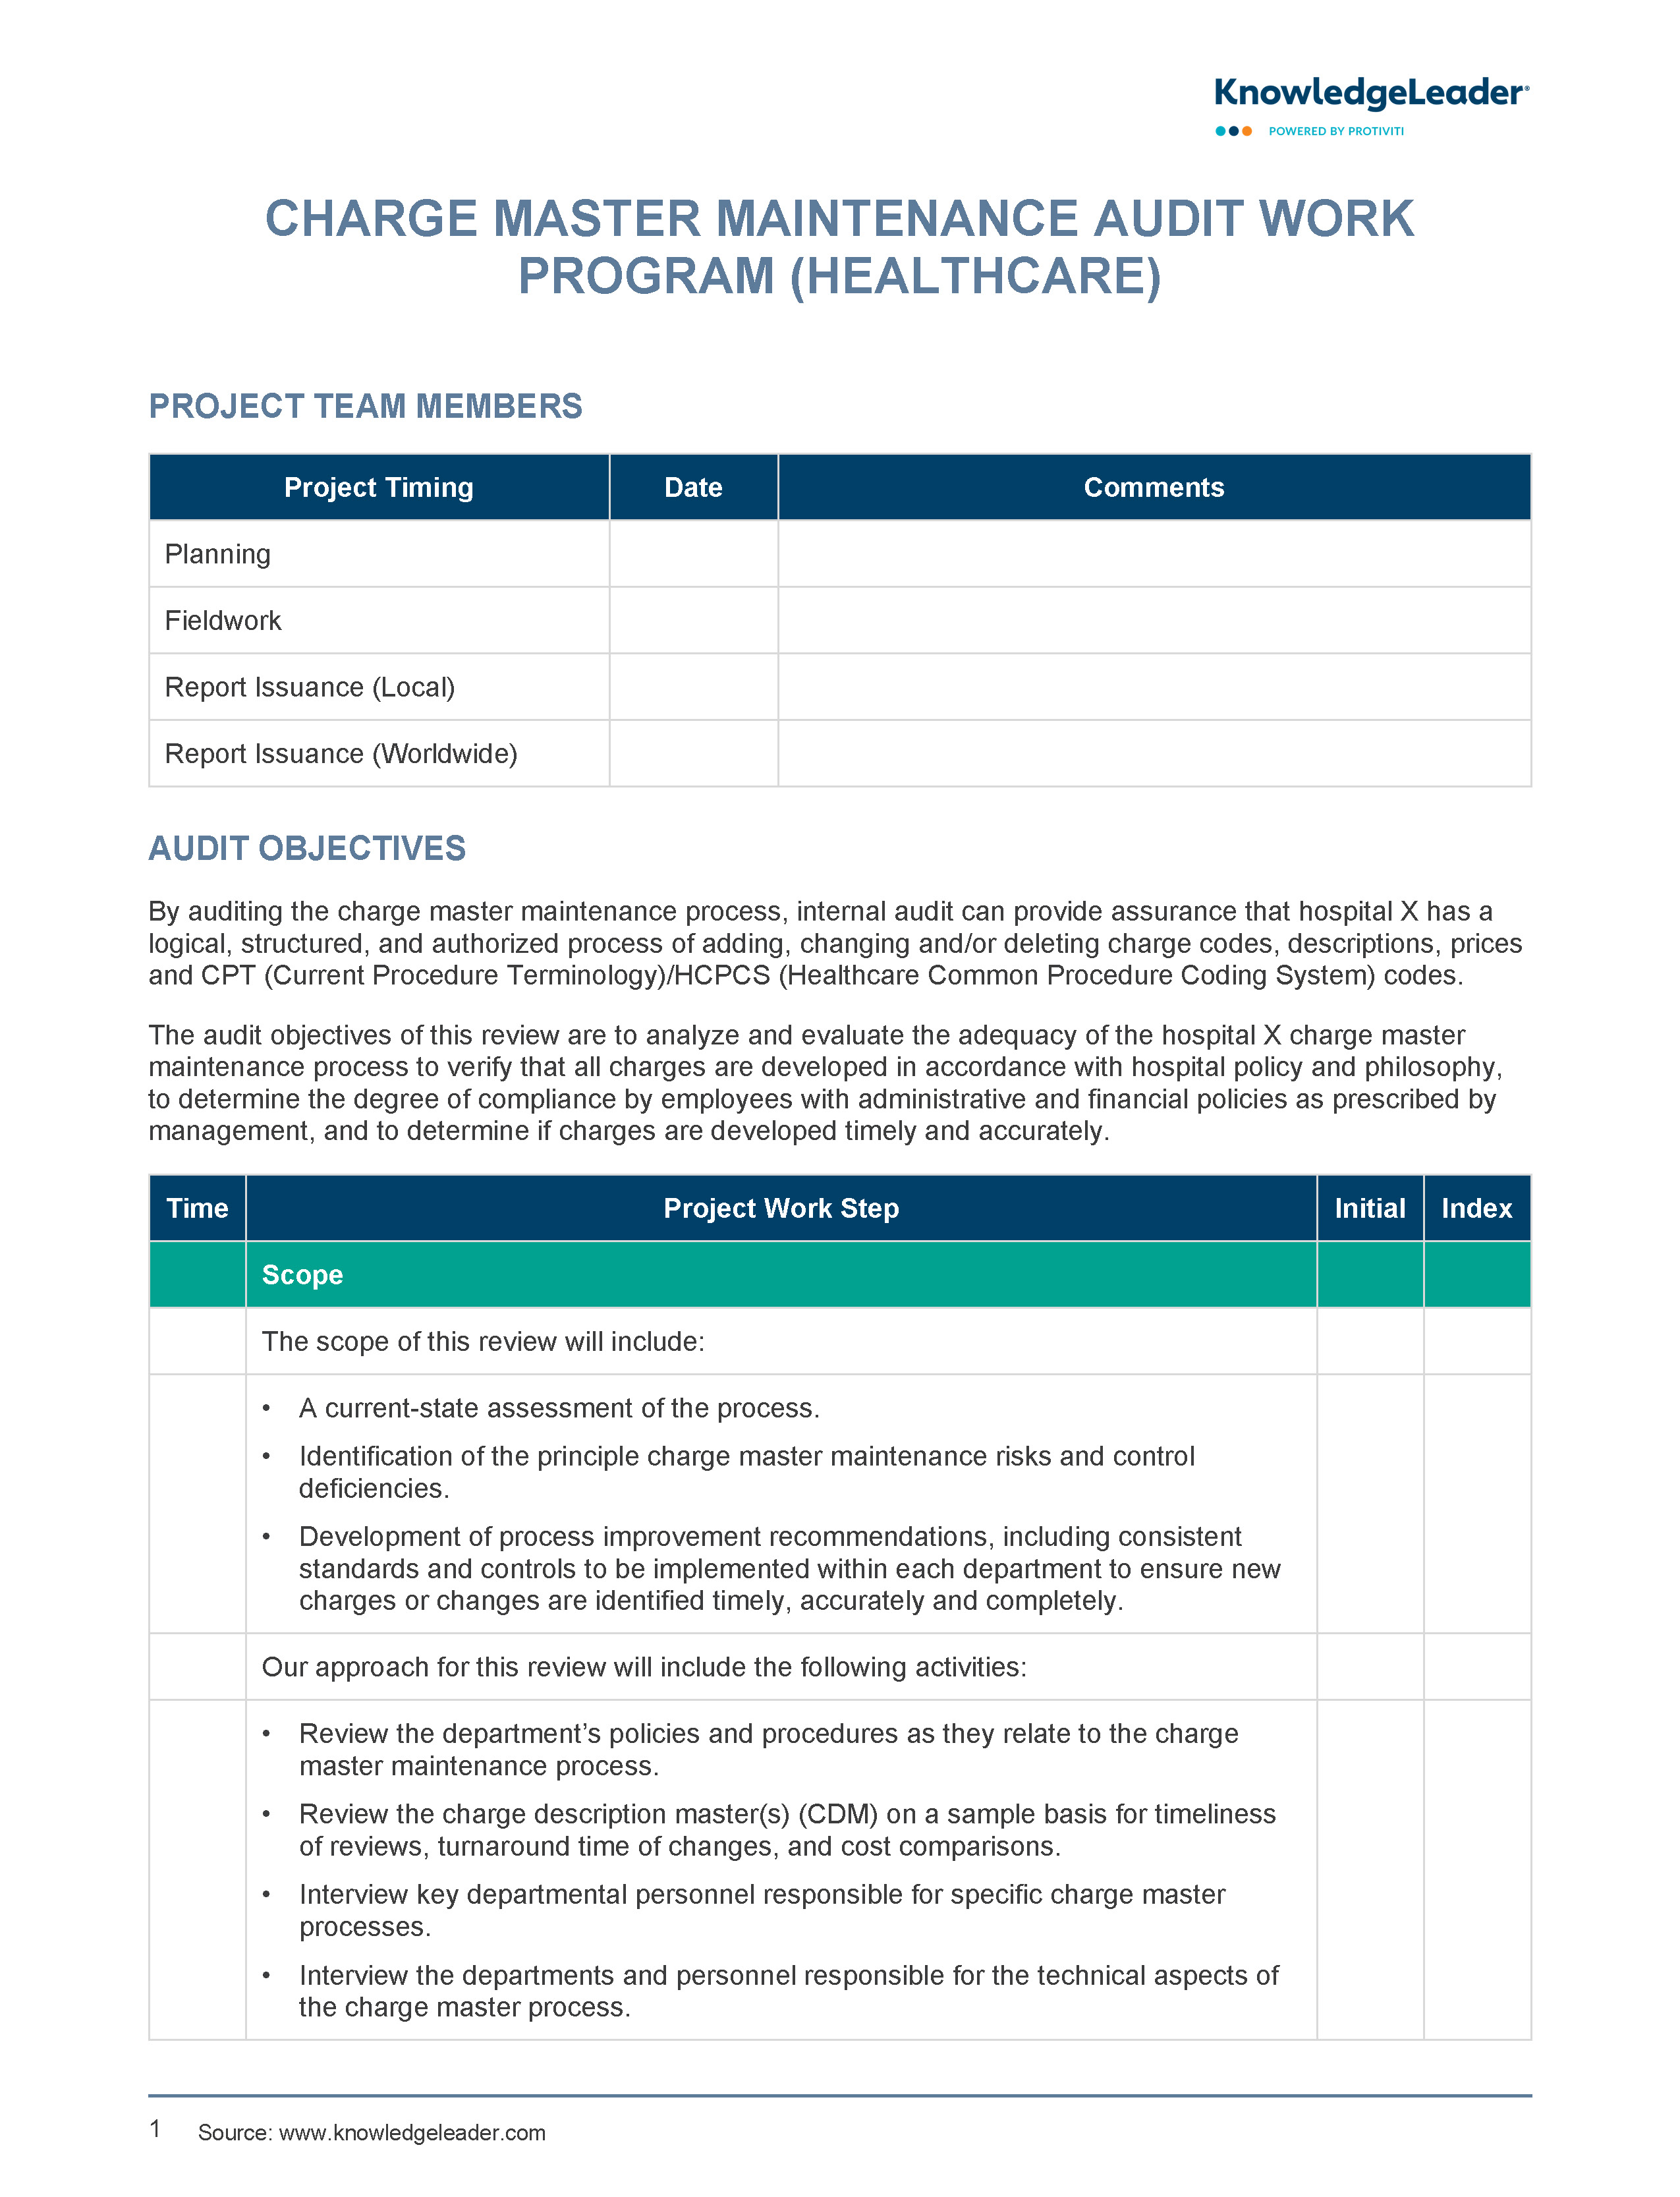 screenshot of the first page of Charge Master Maintenance Audit Work Program (Healthcare)